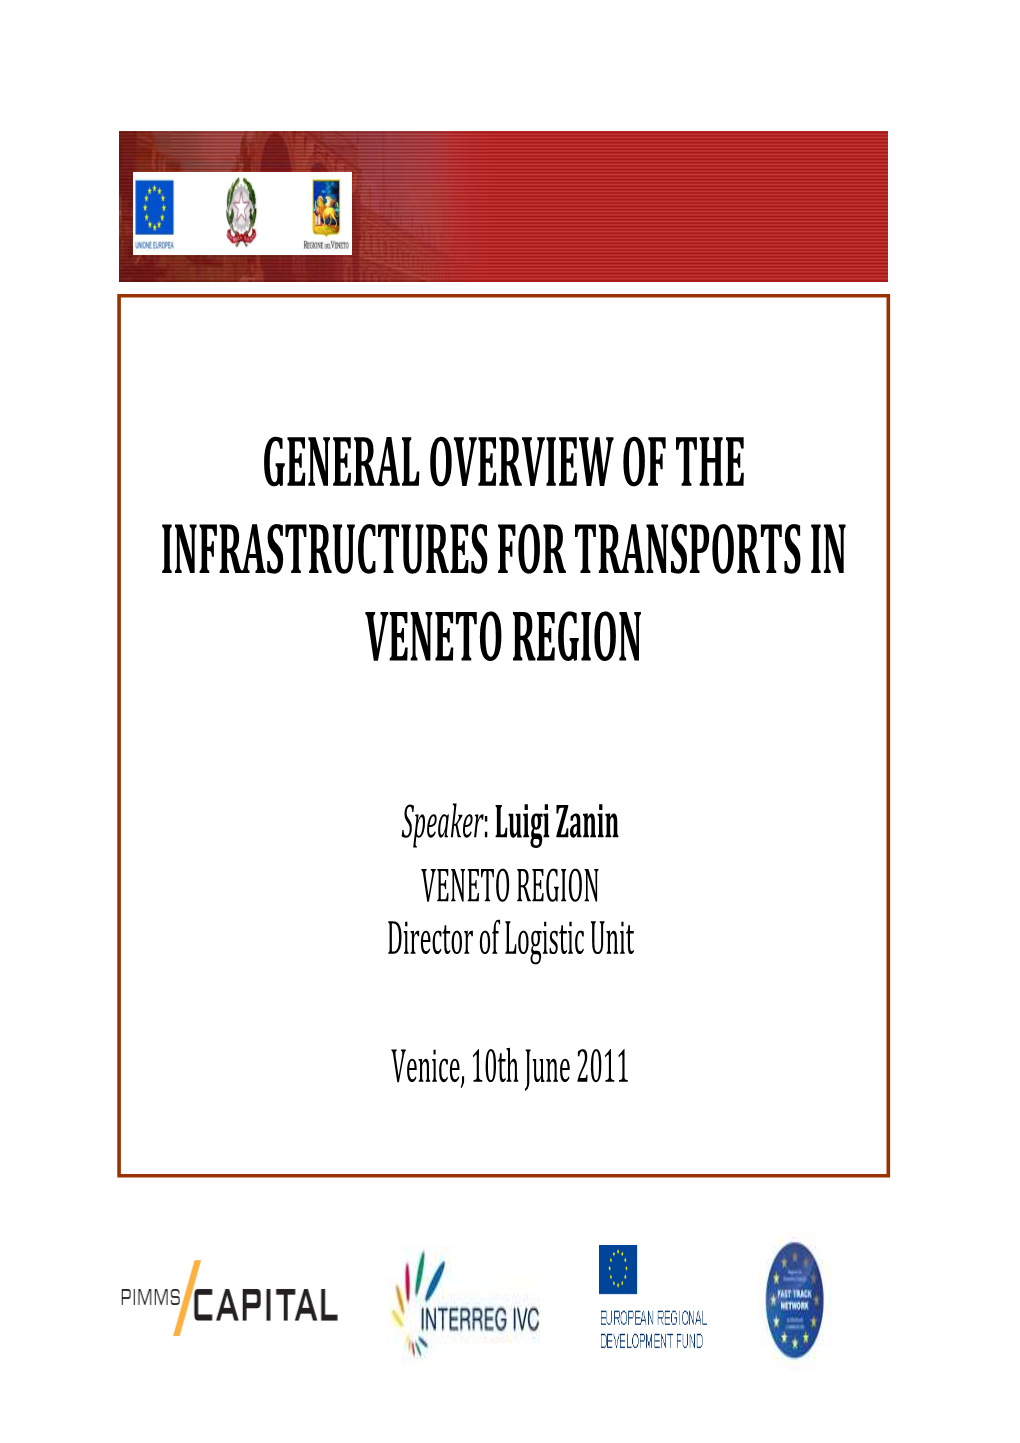 General Overview of the Infrastructures for Transports in Veneto Region